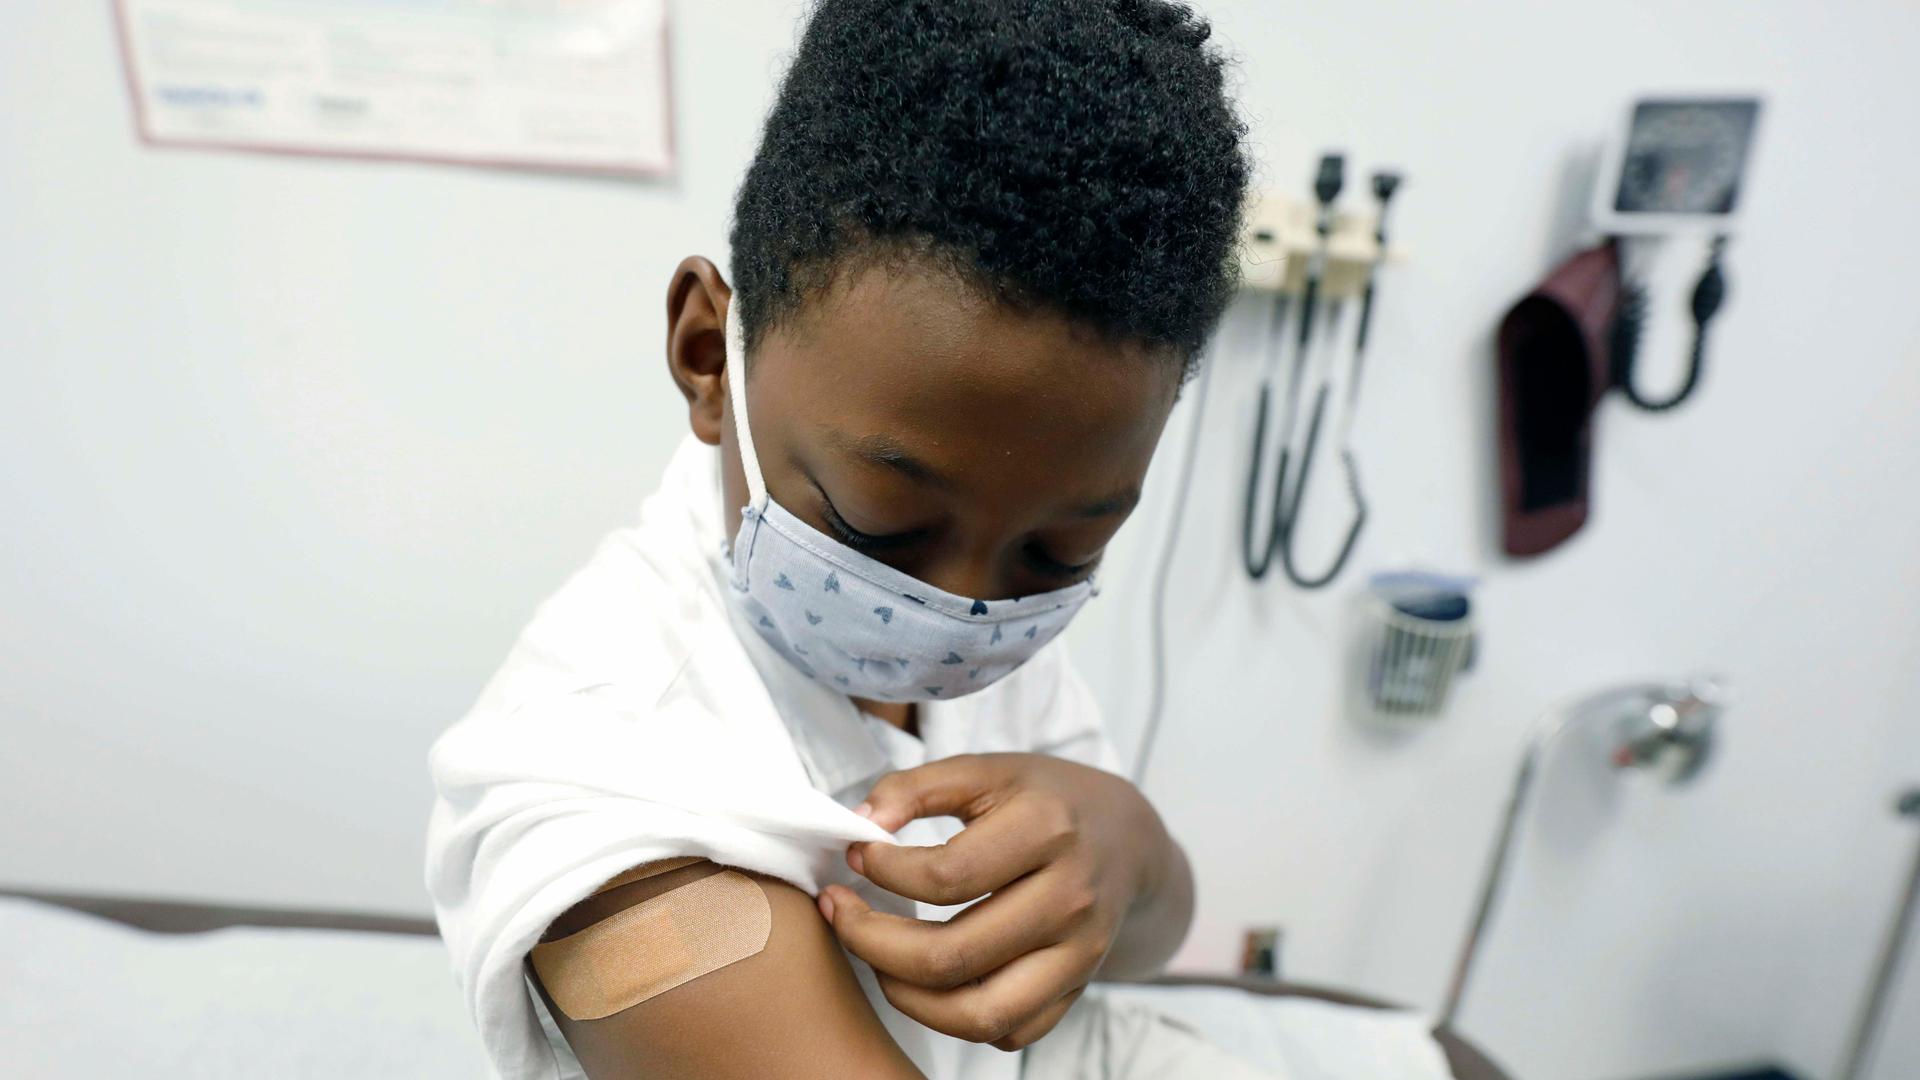 Jeremiah Young, 11, examines his bandage covering during an appointment with Dr. Janice Bacon at the Community Health Care Center on the Tougaloo College campus in Tourgaloo, Miss., Aug. 14, 2020.